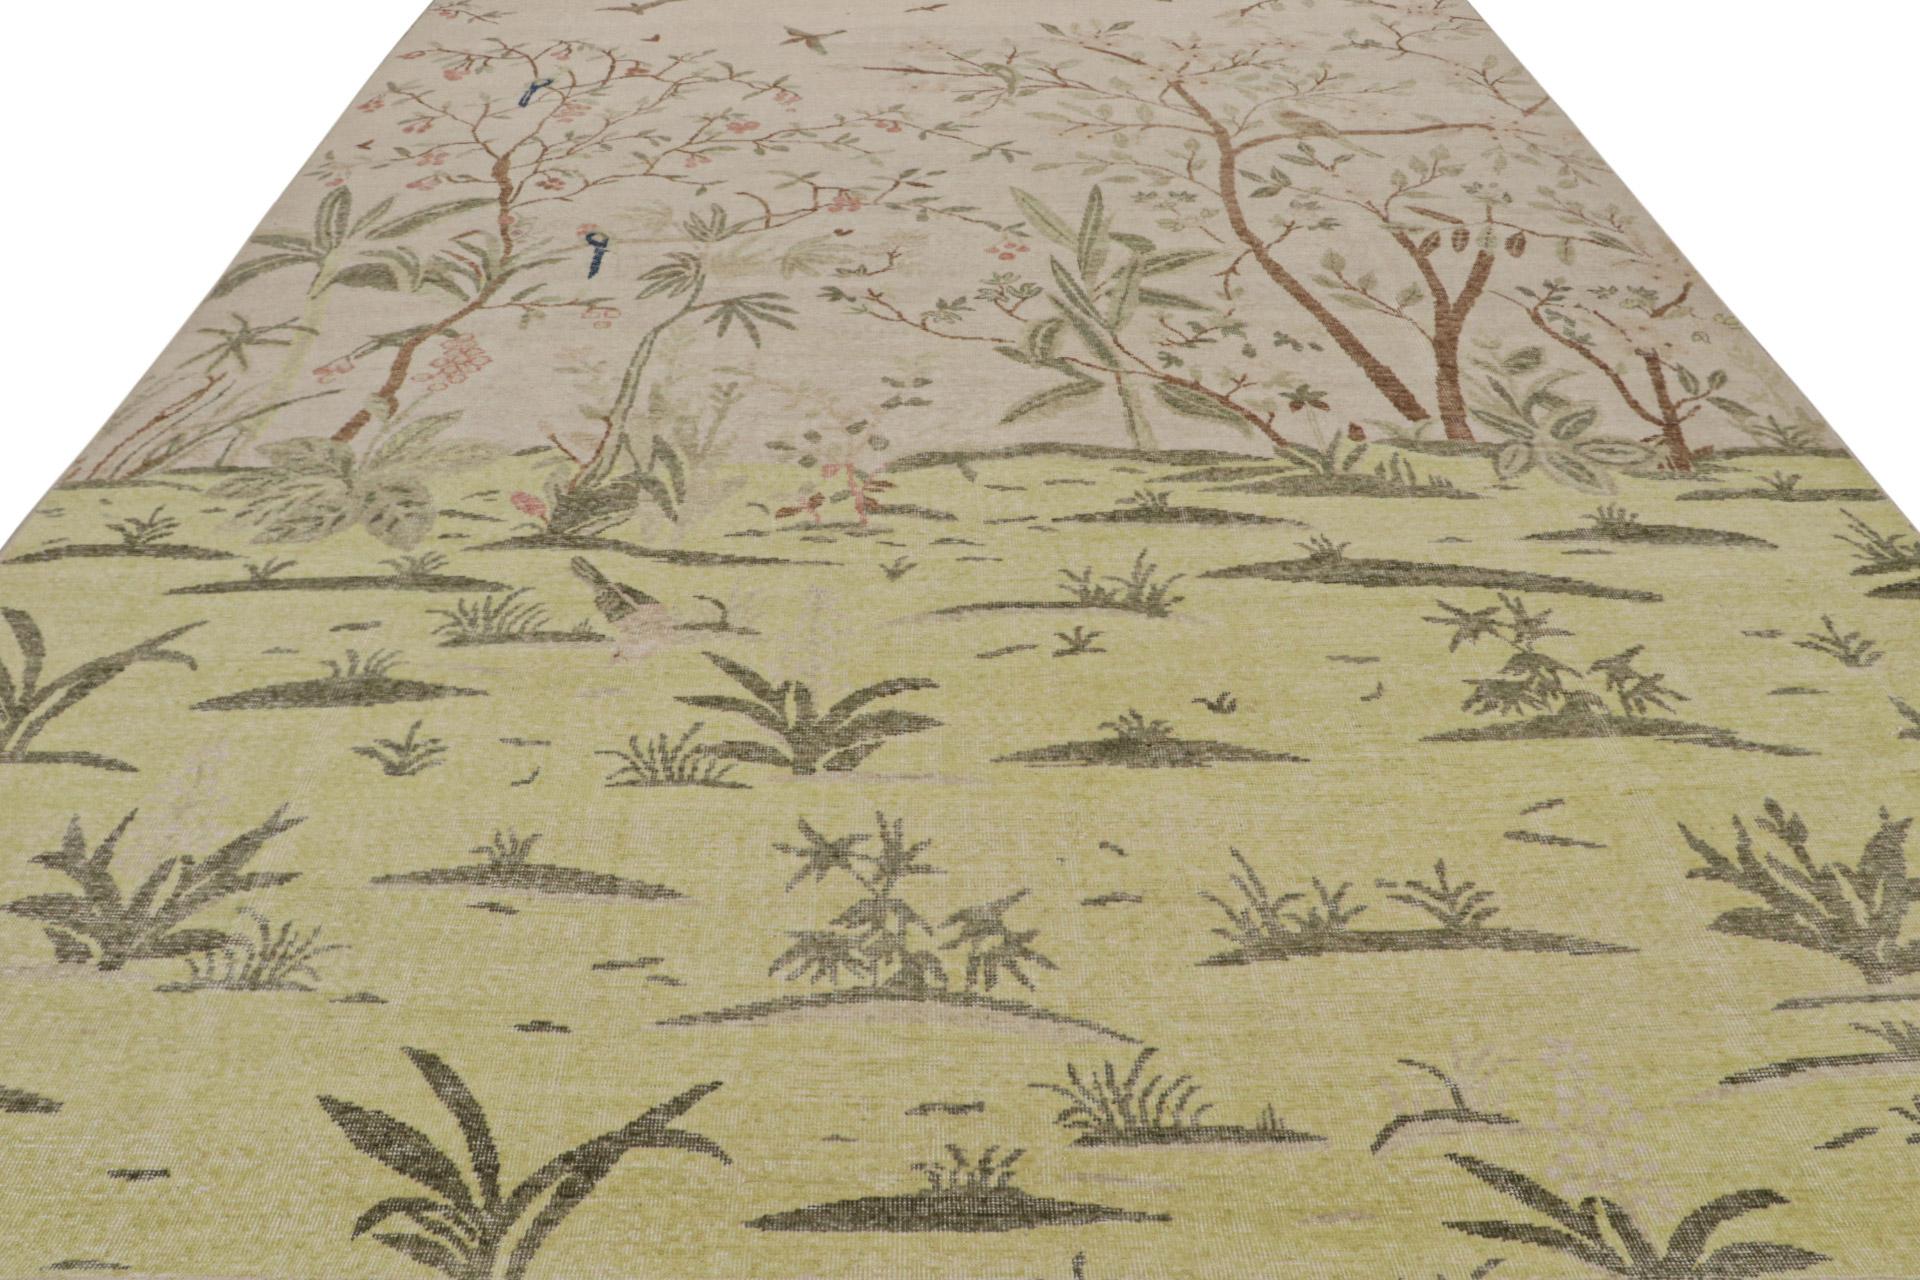 Indian Rug & Kilim’s Modern Pictorial Rug in Green and Taupe, with Scenery Depiction For Sale